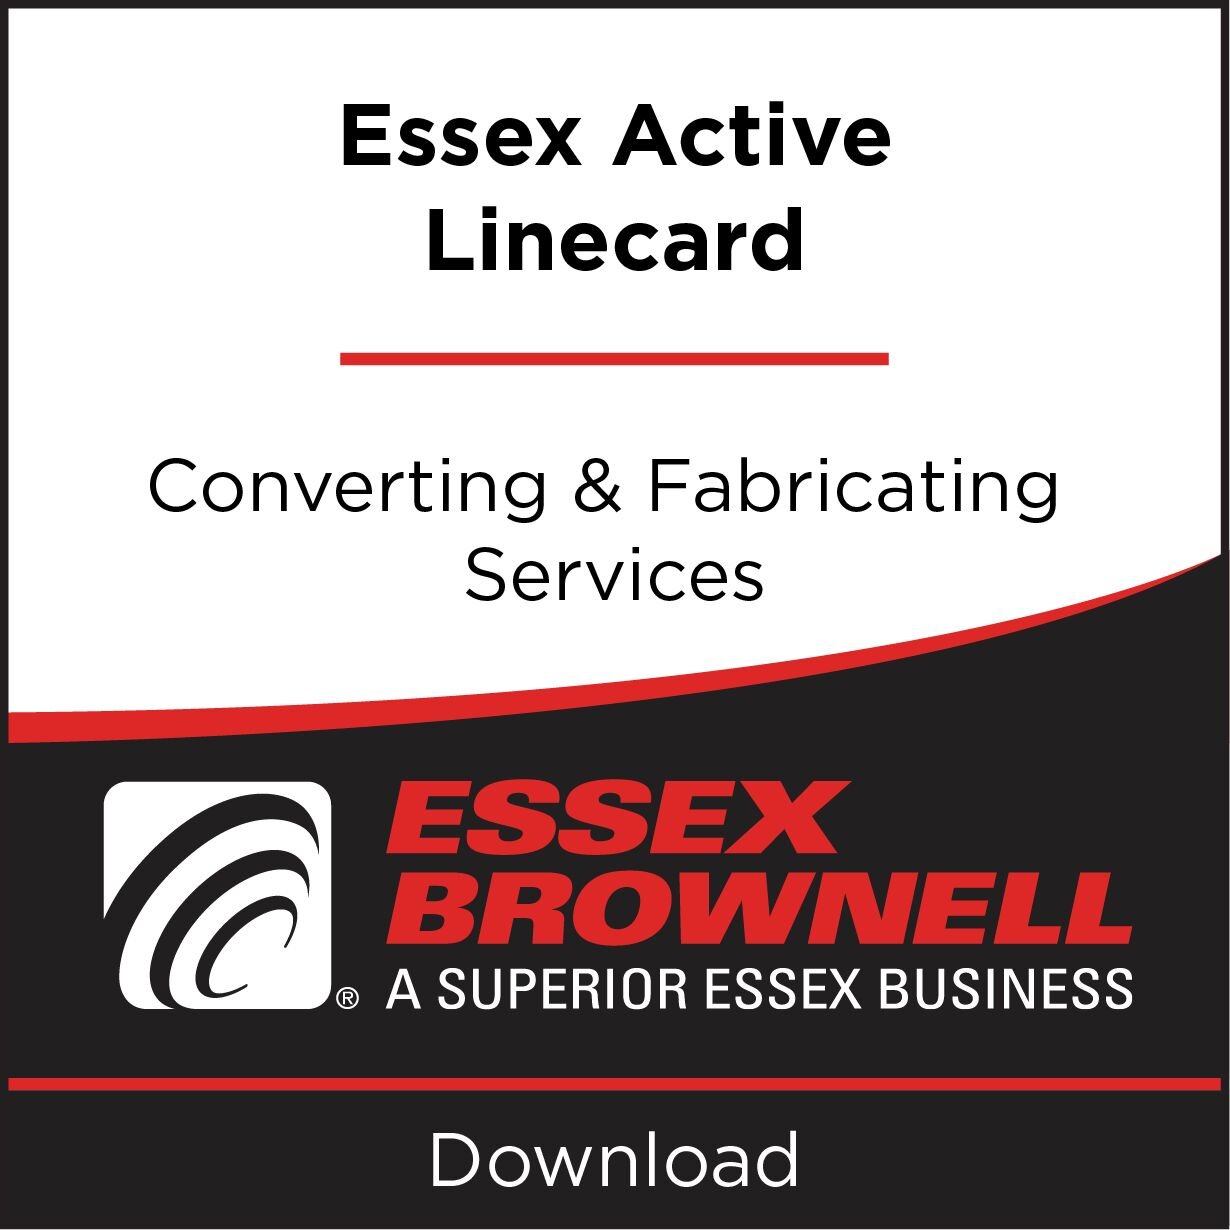 Essex Active Linecard (Converting & Fabricating Services)